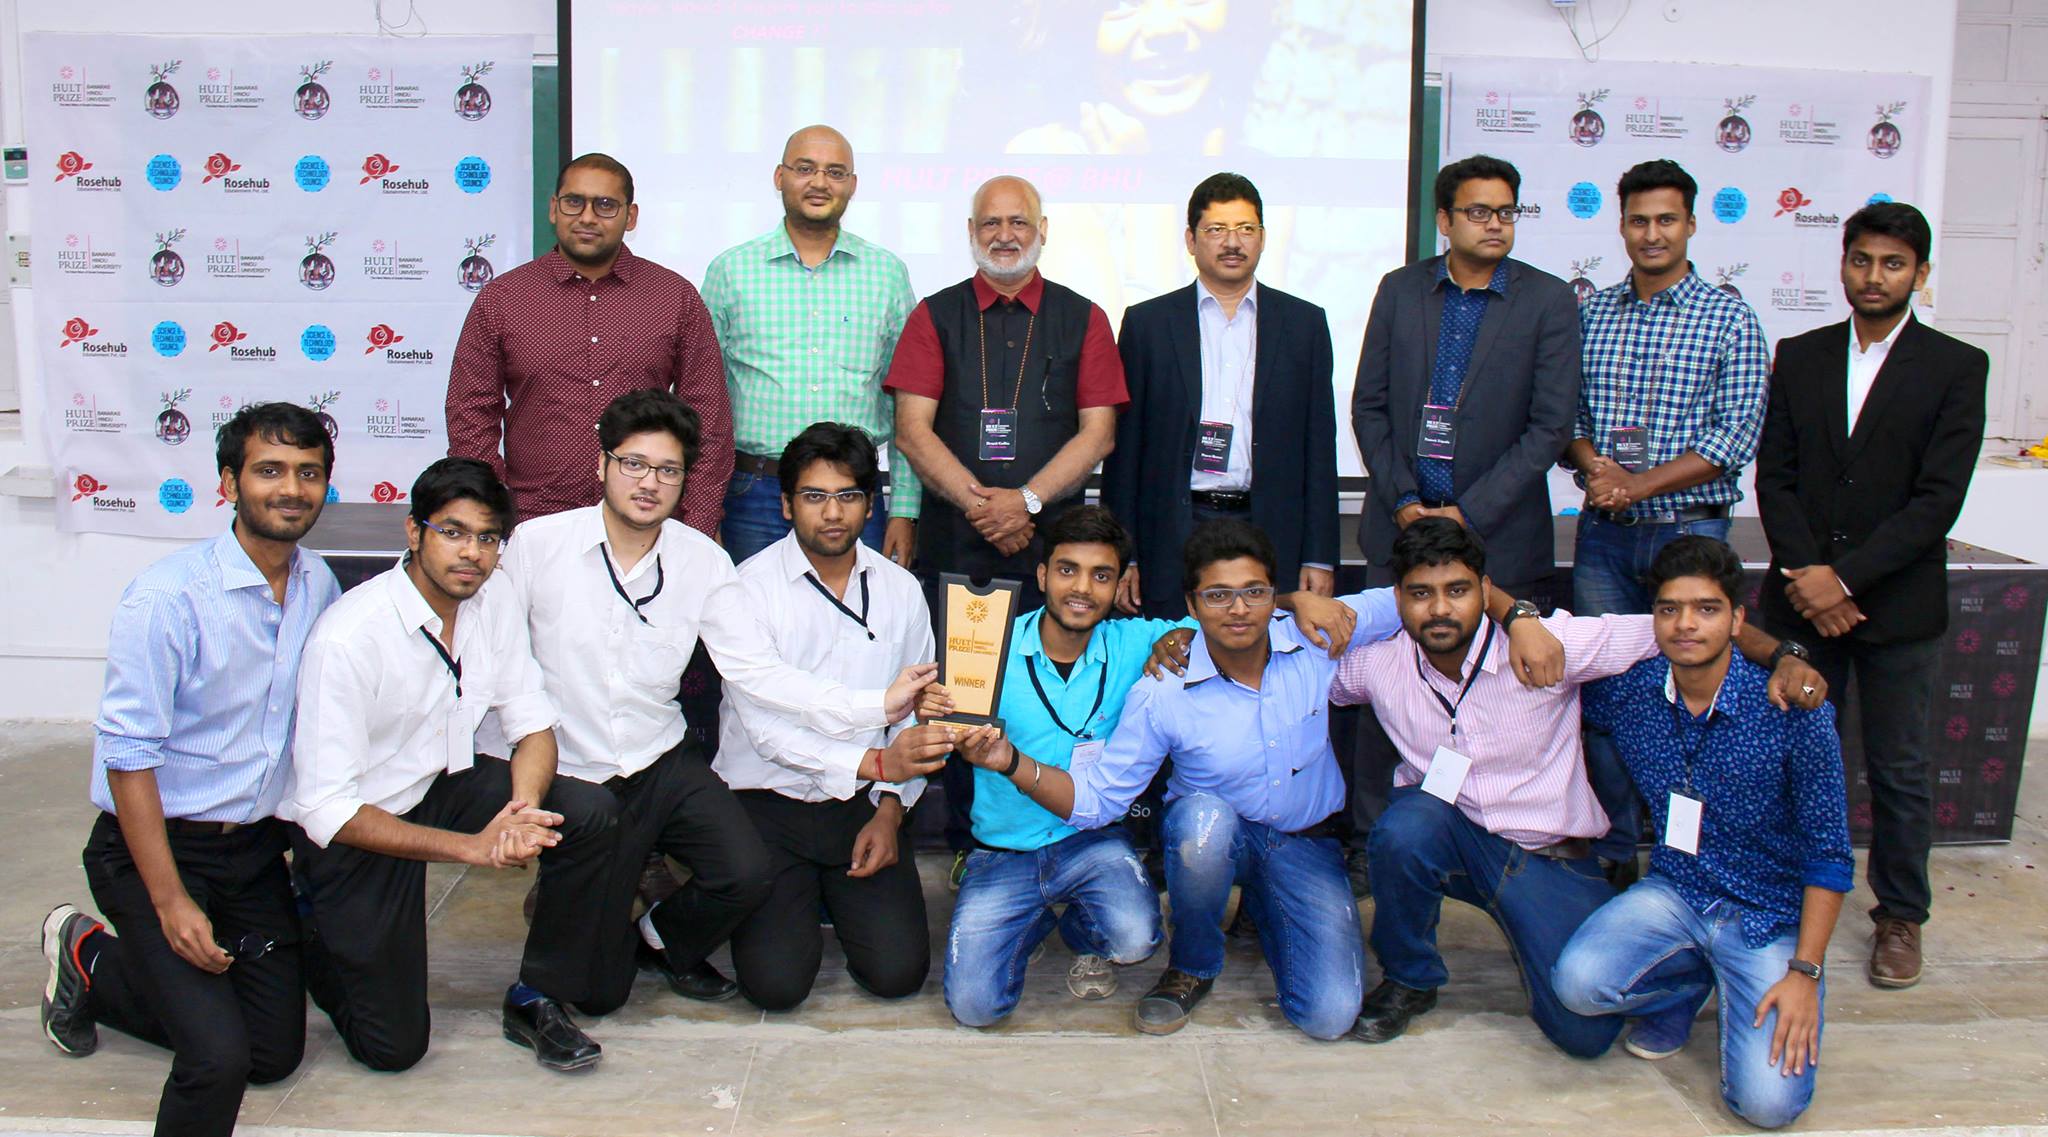 Teams from BHU advance to Regional Finals of 7th Annual Hult Prize